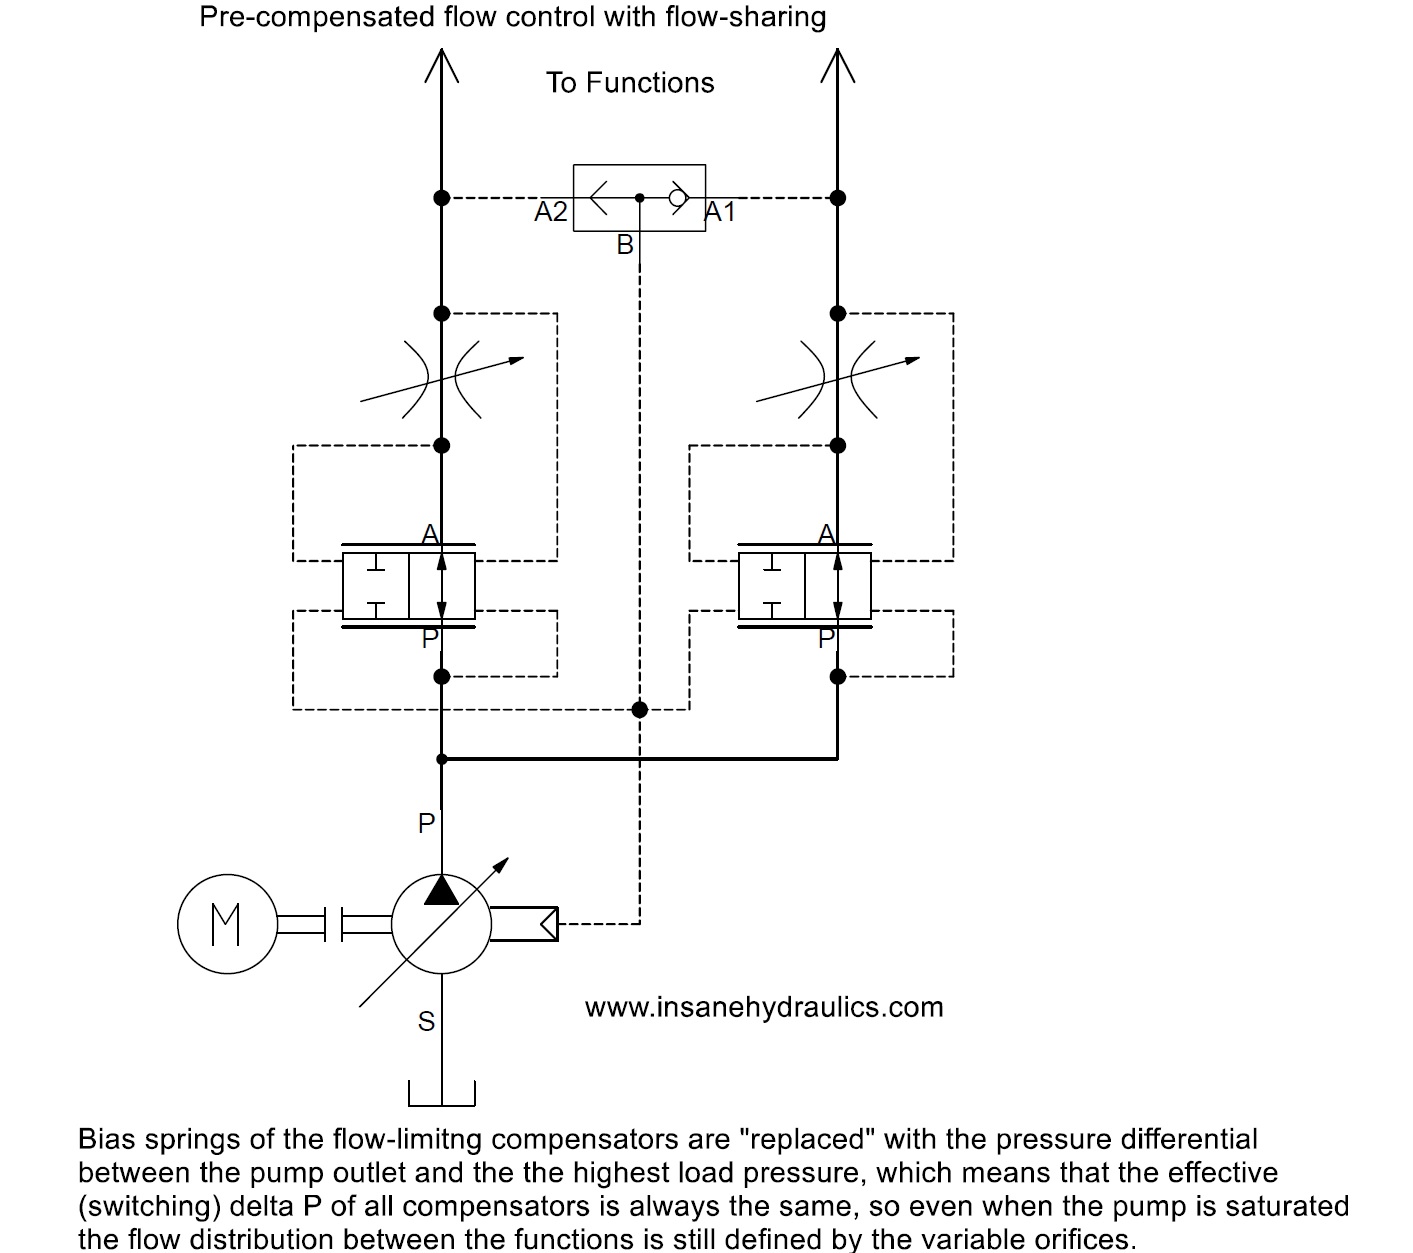 Pre-compensated hydraulic system with flow sharing